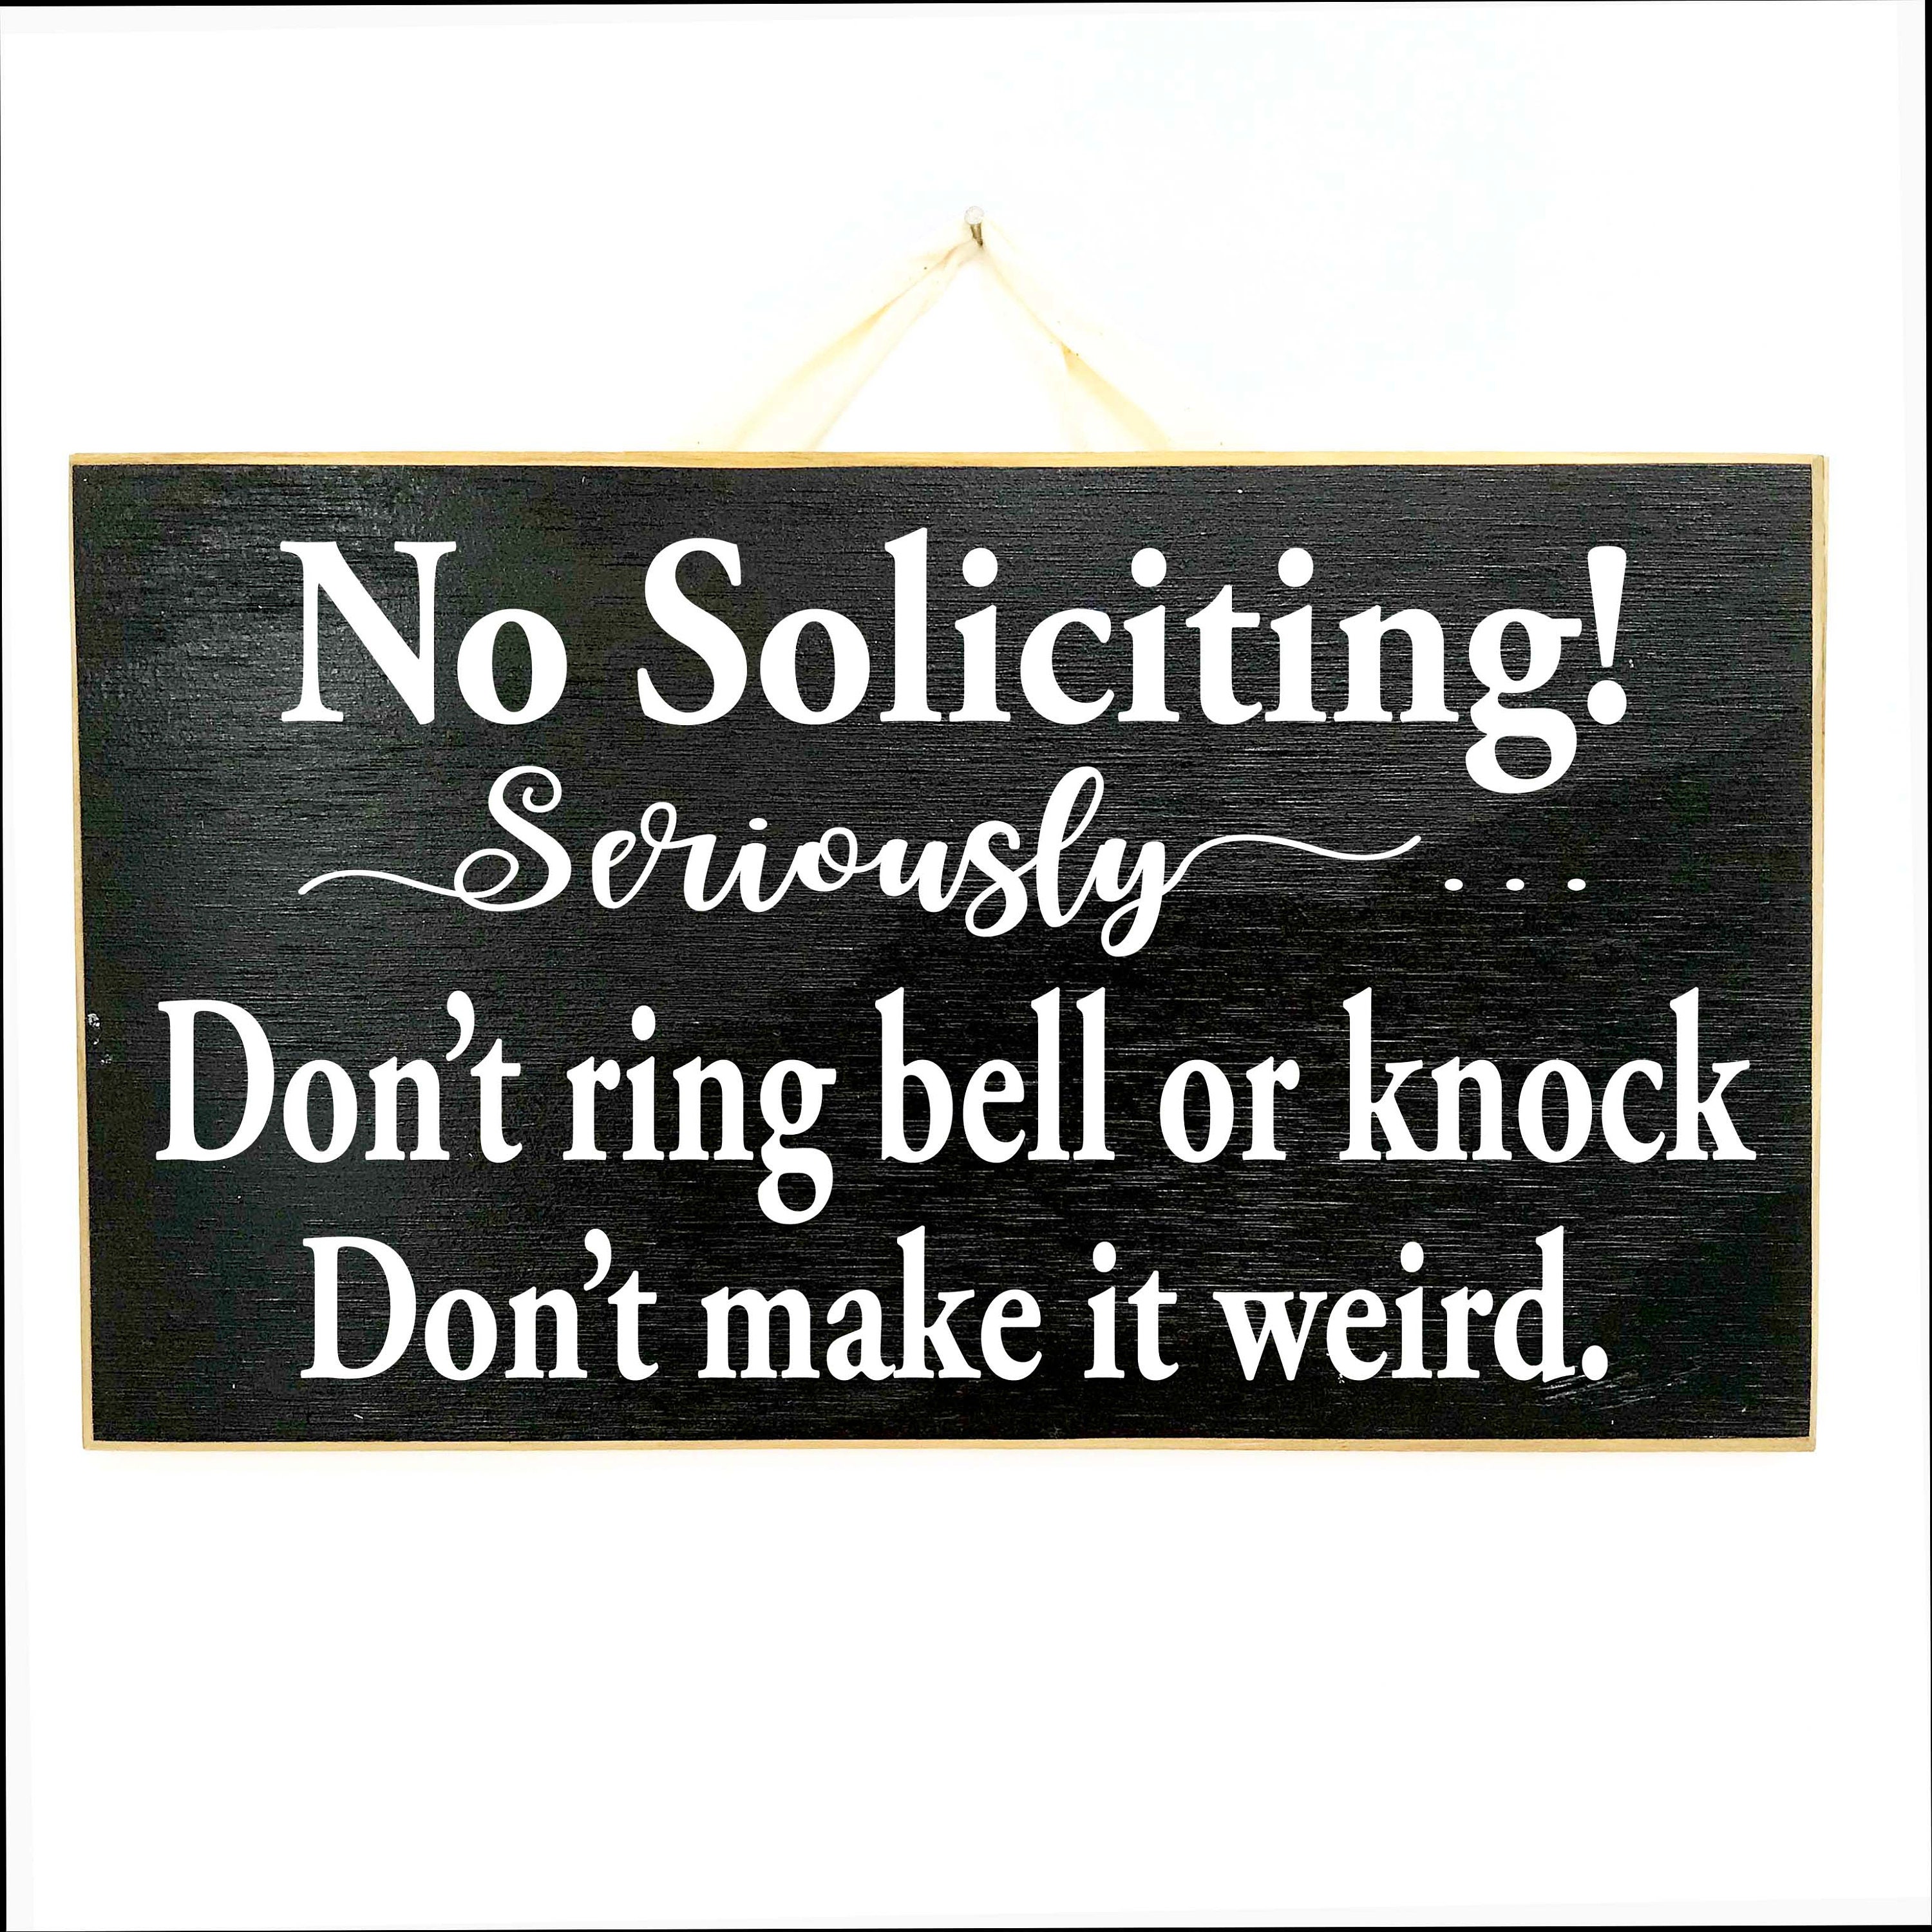 Seriously make weird soliciting no dont it No Soliciting